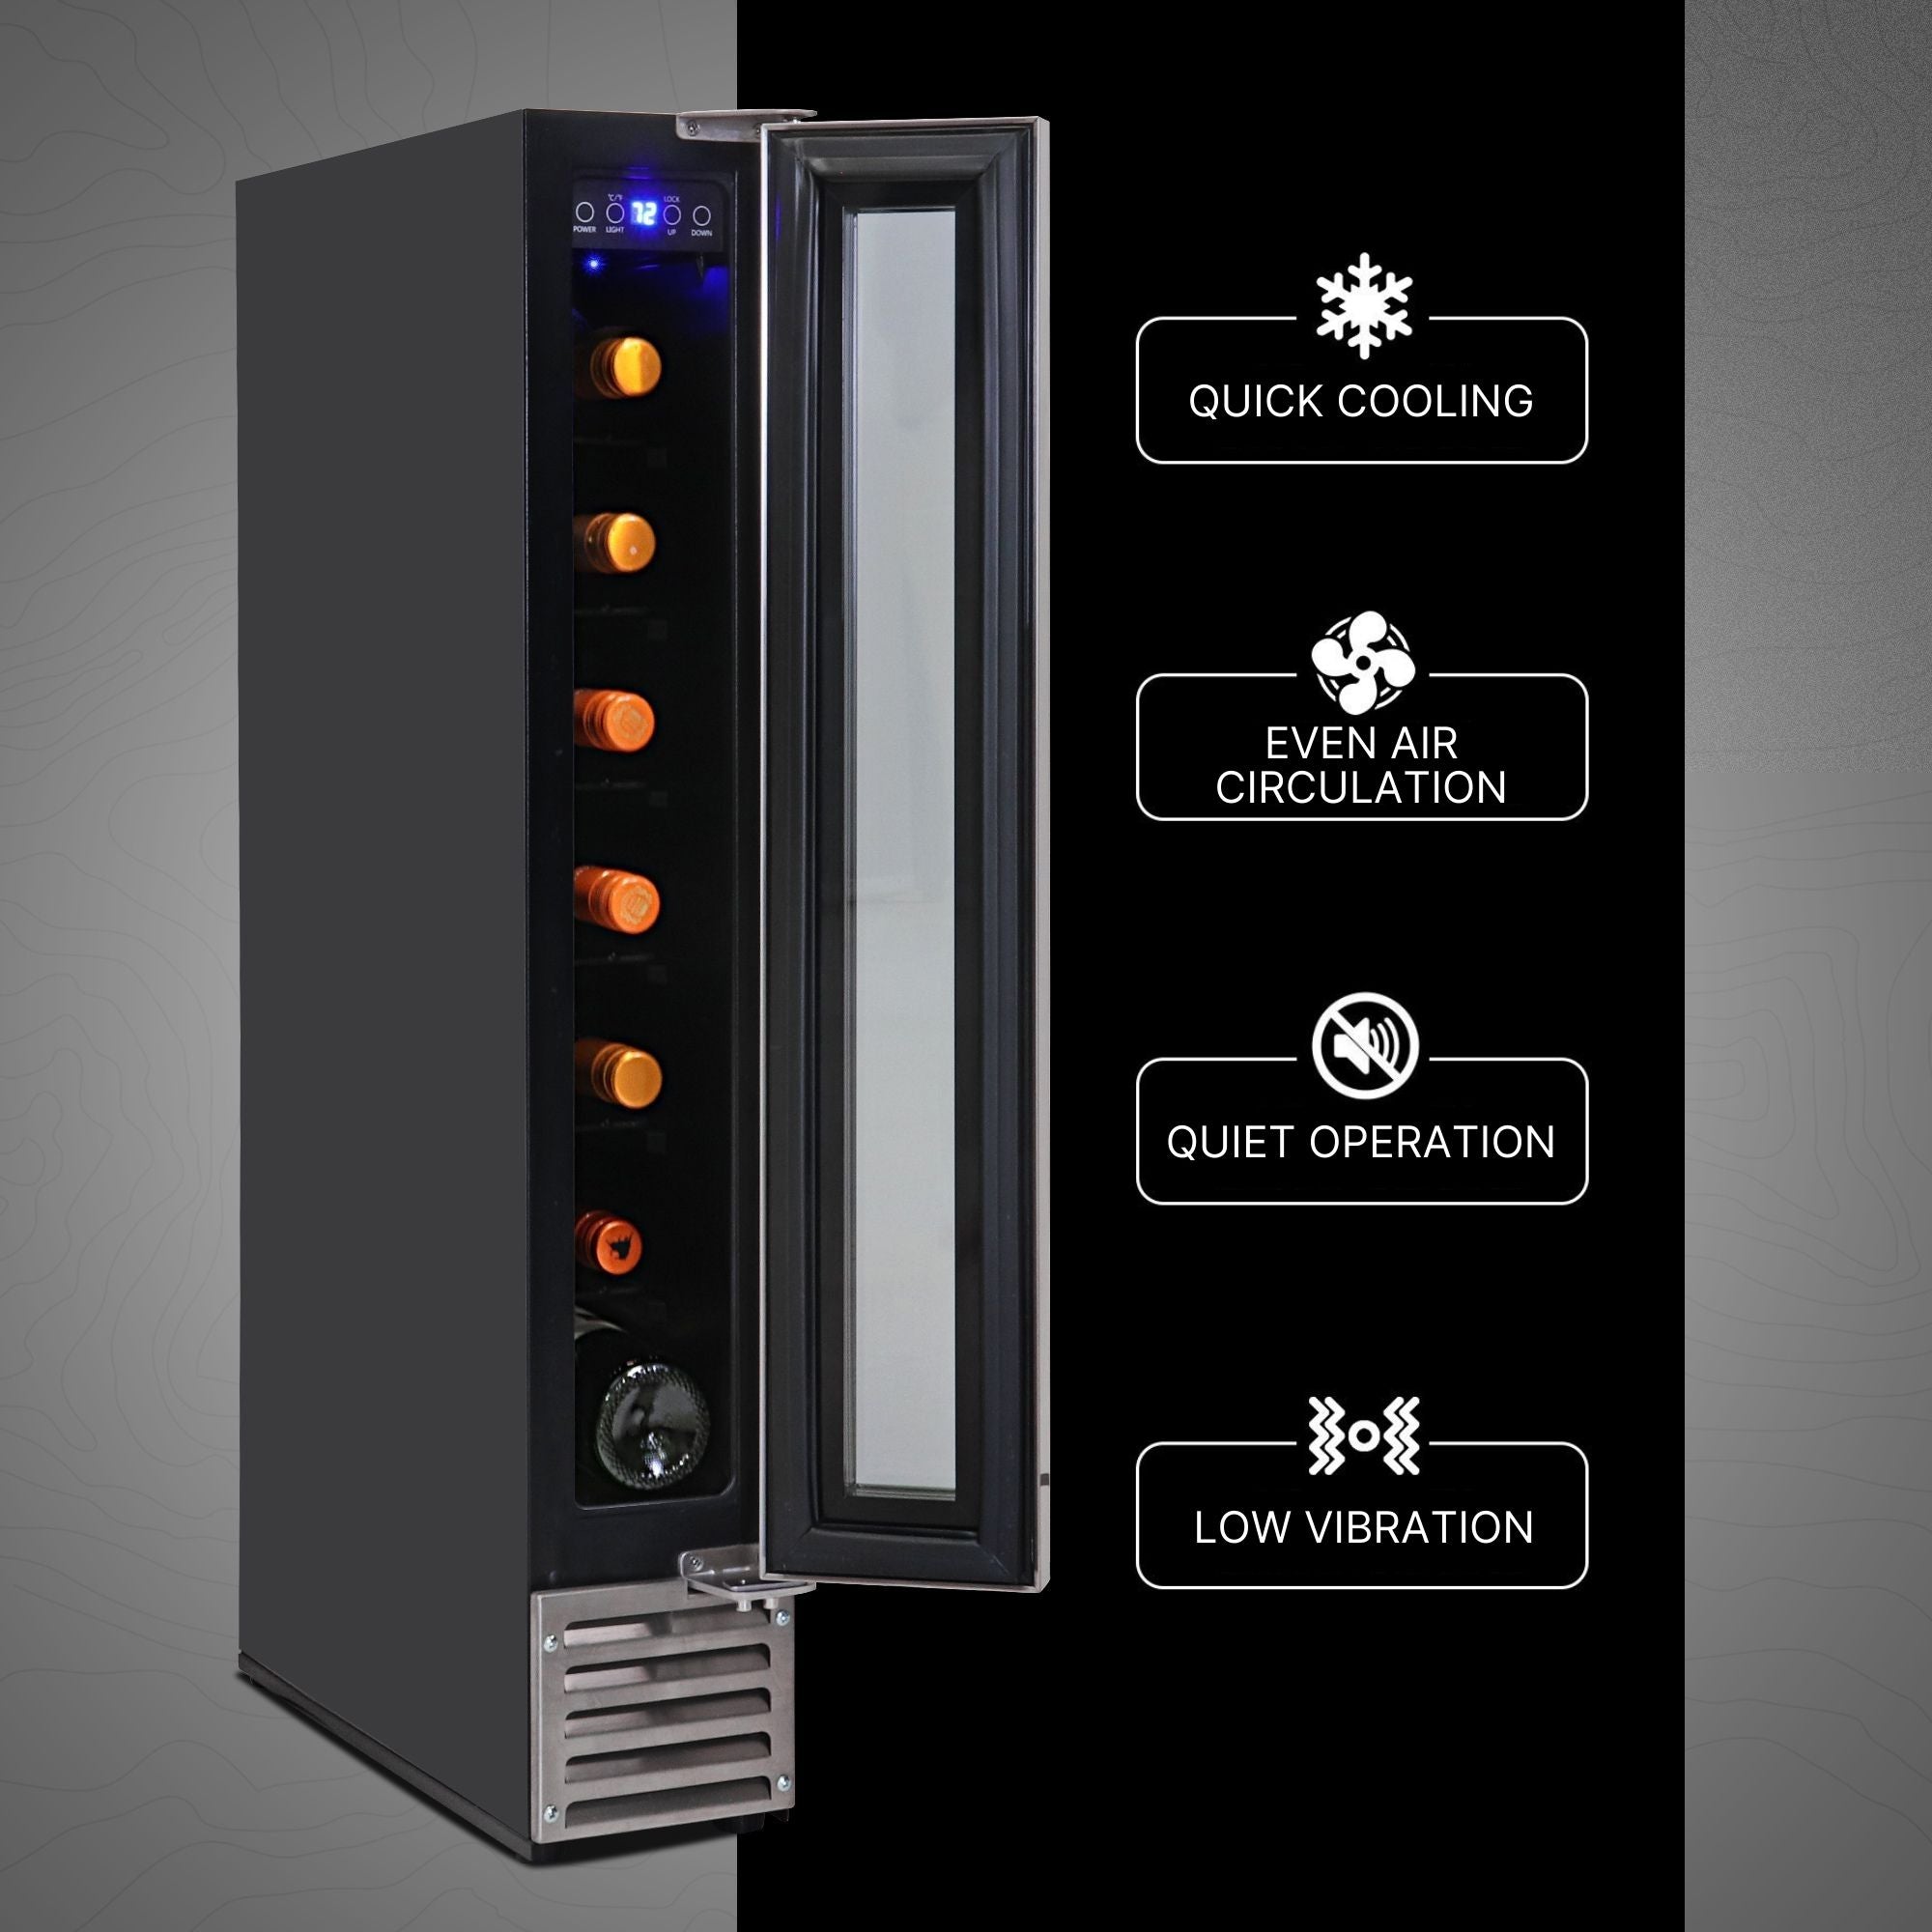 Koolatron 7 bottle single zone wine cooler, open and filled with bottles of wine, on a gray background. Text and icons to the right describe features: Even air circulation; quick cooling; quiet operation; low vibration